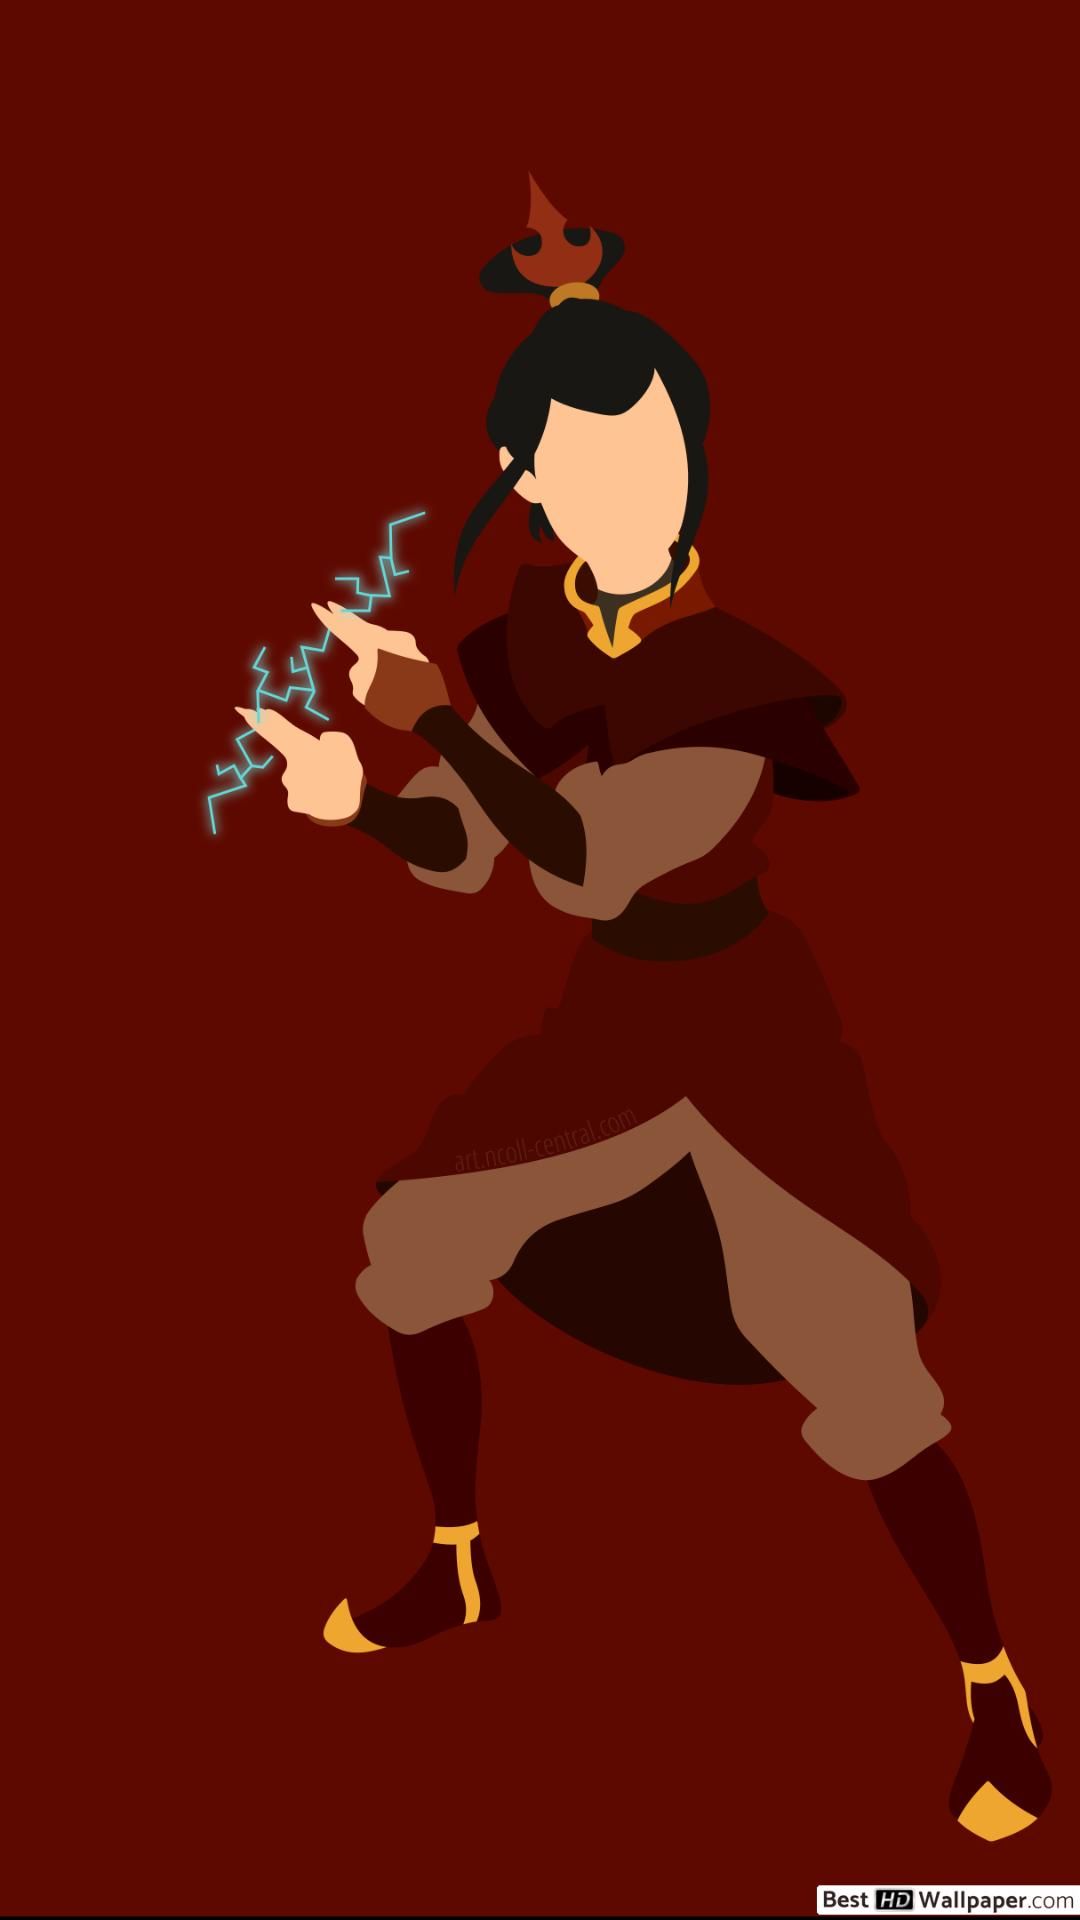 Avatar The Last Airbender Iphone Wallpapers Hotsell, 56% OFF 